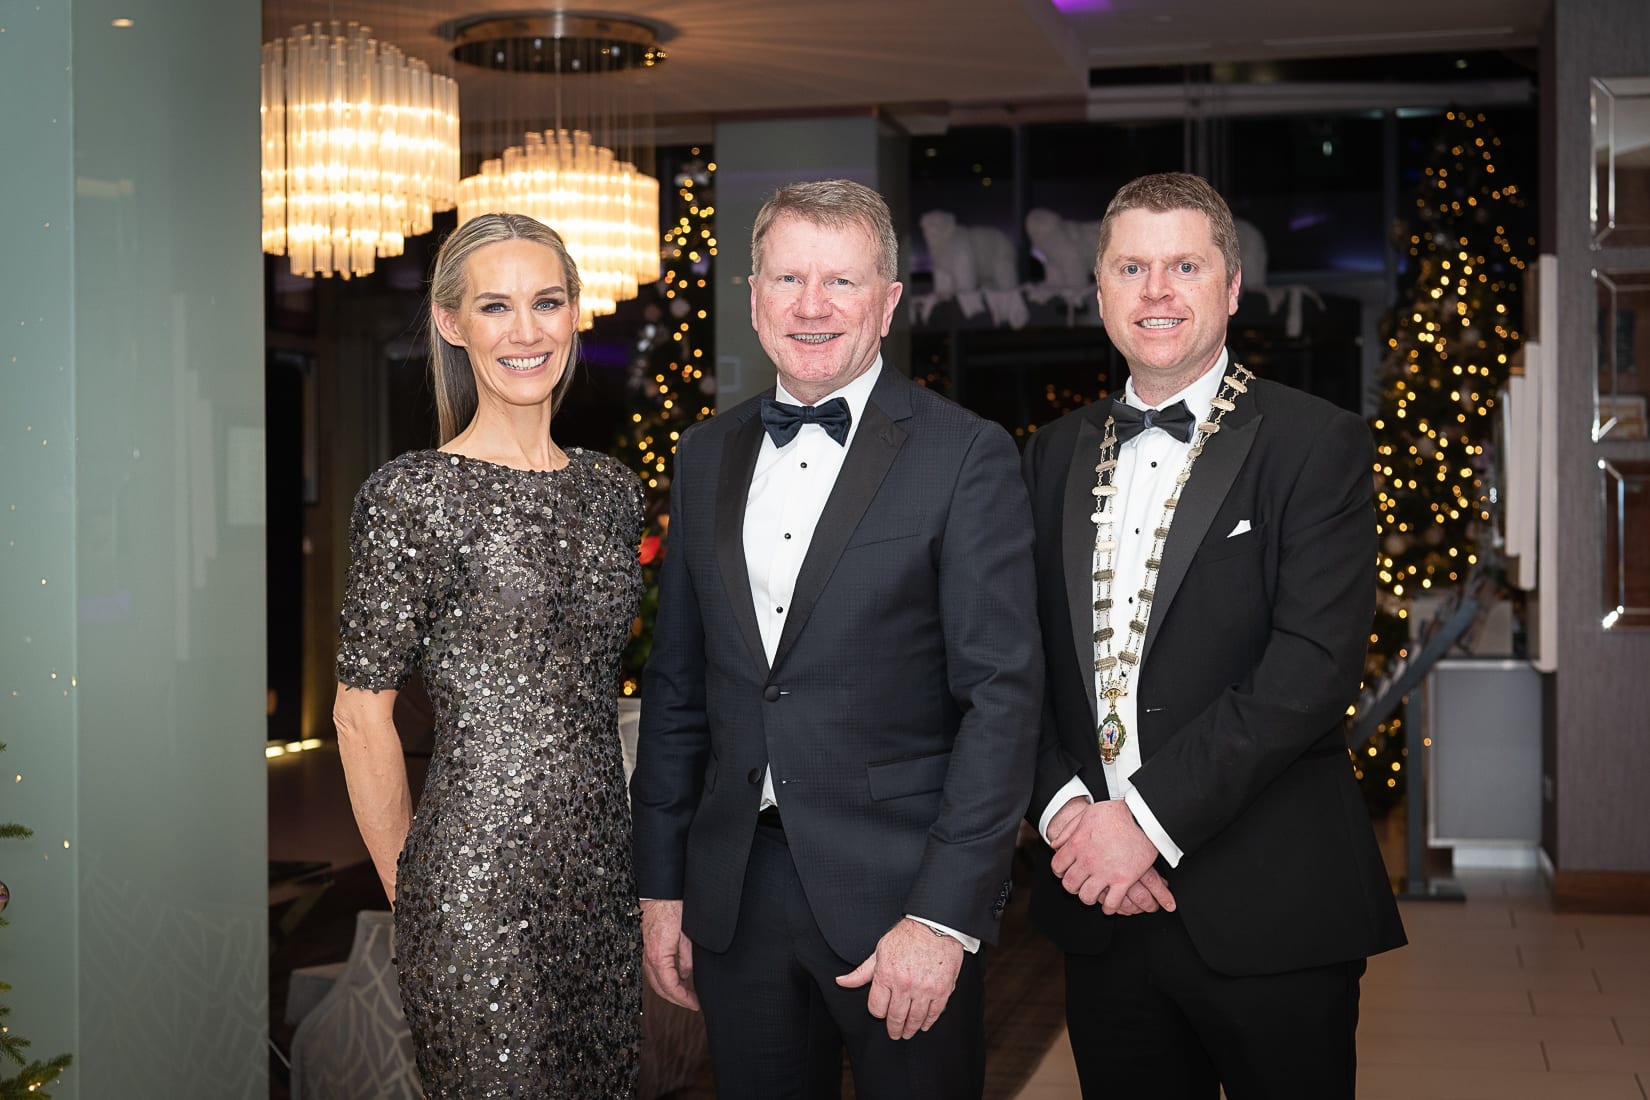 No repro fee-Limerick Chamber President’s Dinner
and Limerick Chamber Regional Business Awards 2019 which was held in the Strand Hotel on Friday 15th November /President Award/  - From Left to Right: Dee Ryan - CEO Limerick Chamber, Dr Hugh O’Donnell- WINNER / Ingenium Training and Consultancy, Eoin Ryan - President Limerick Chamber, 
Photo credit Shauna Kennedy